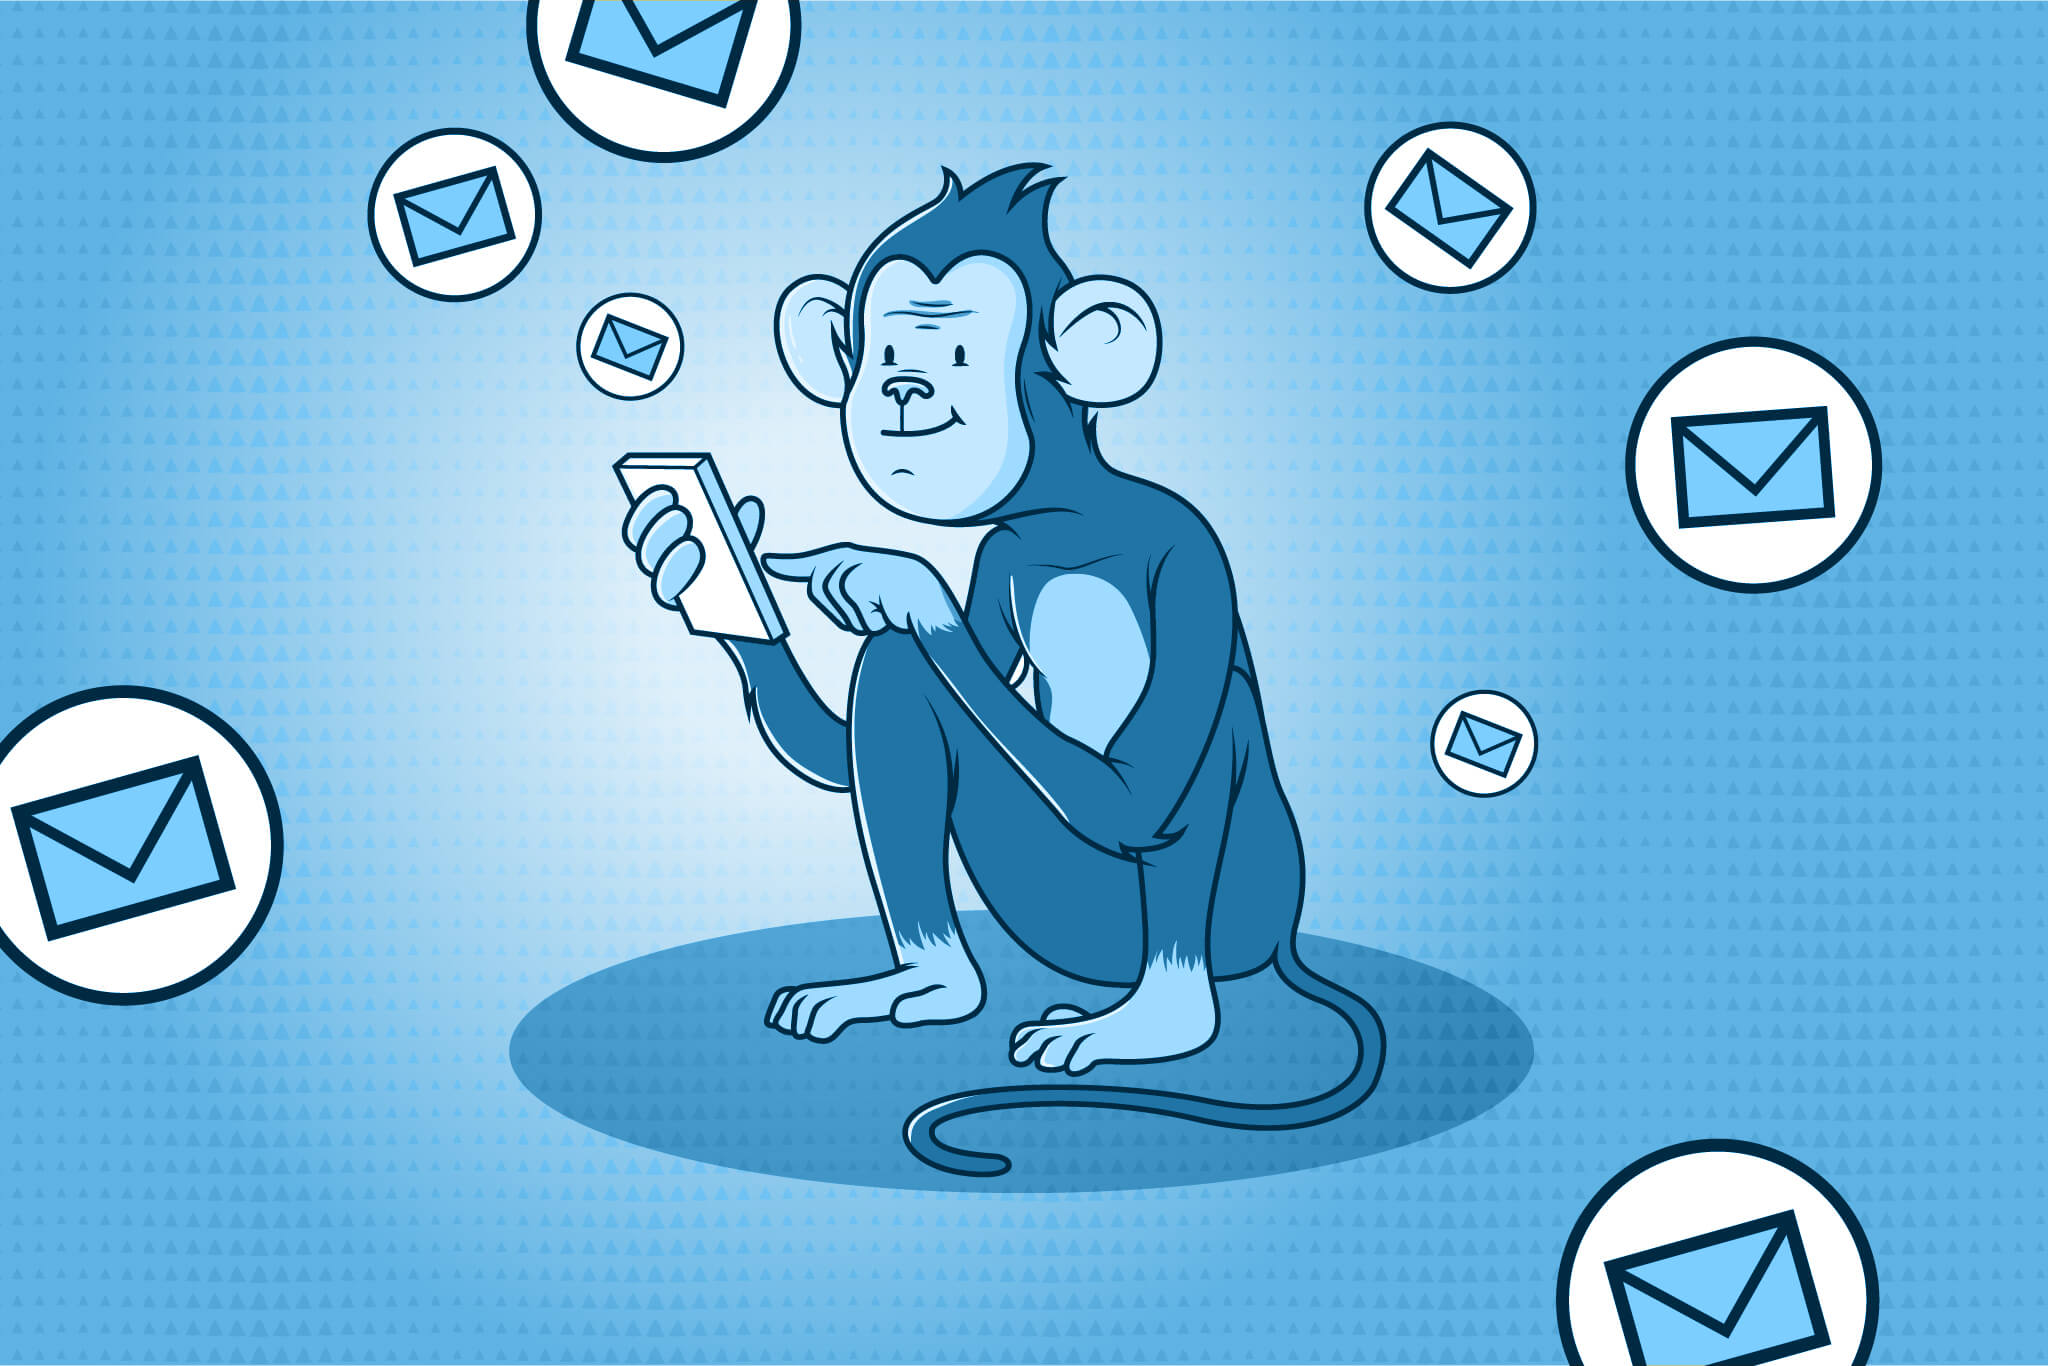 Intuit ACQUIRES MAILCHIMP, AND WHAT THAT MEANS FOR MARKETERS AND CLIENTS